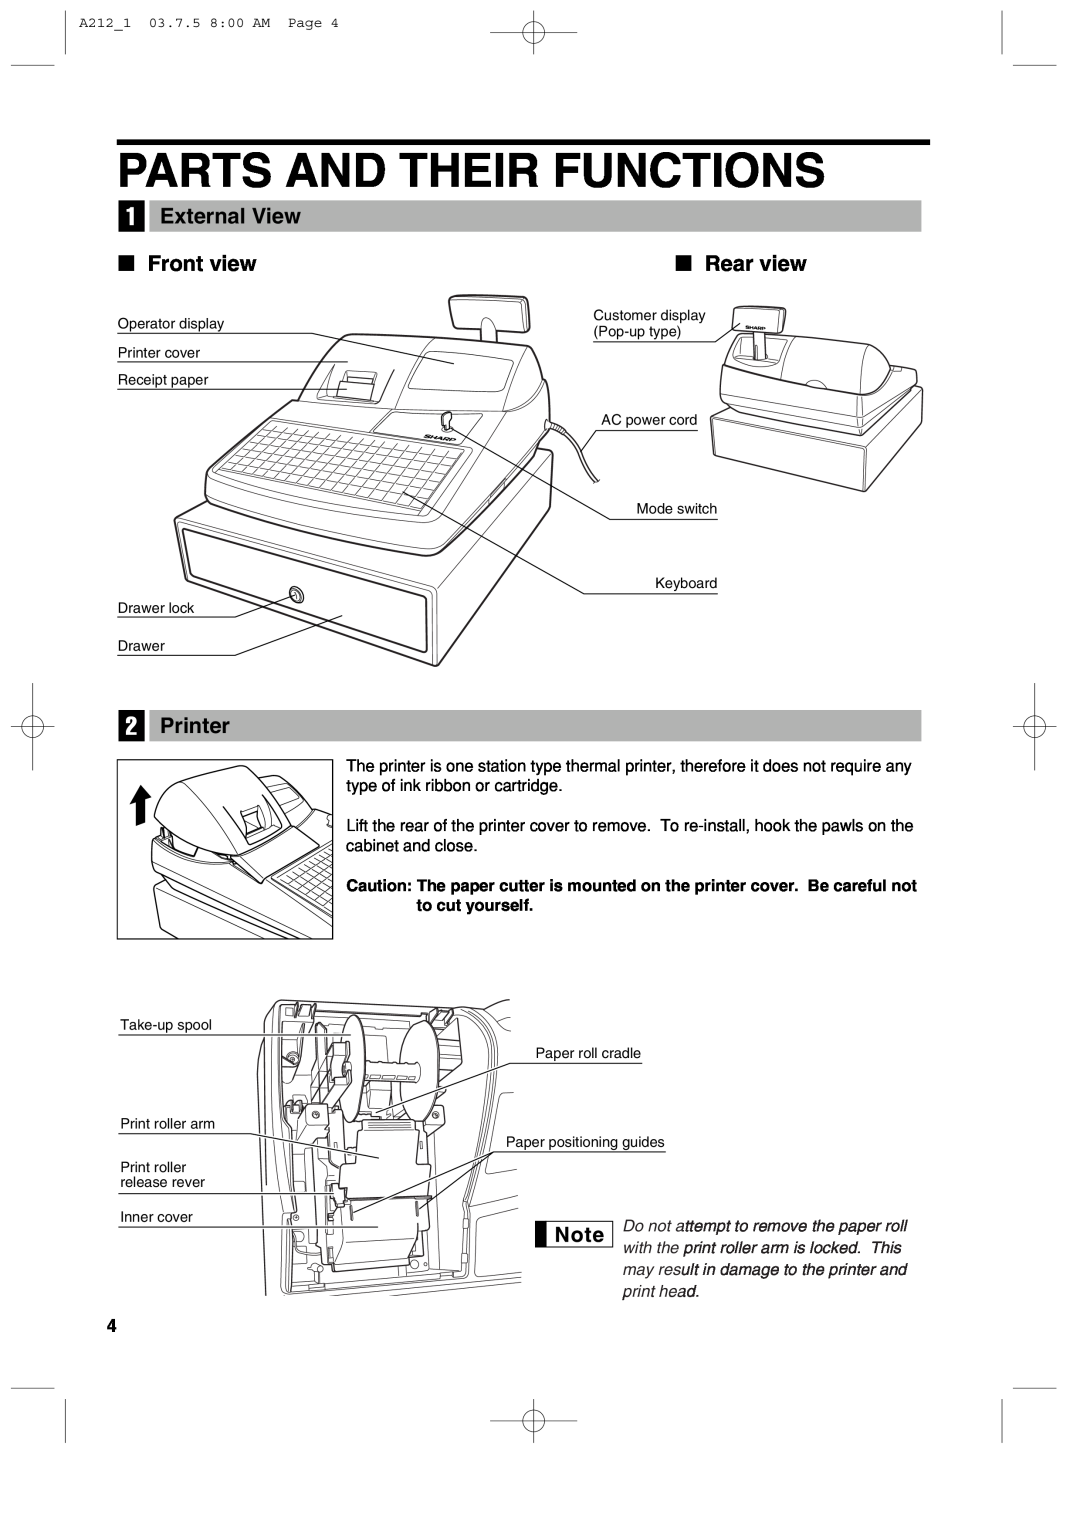 Sharp XE-A212 instruction manual Parts And Their Functions, External View, Front view, Printer, Rear view 